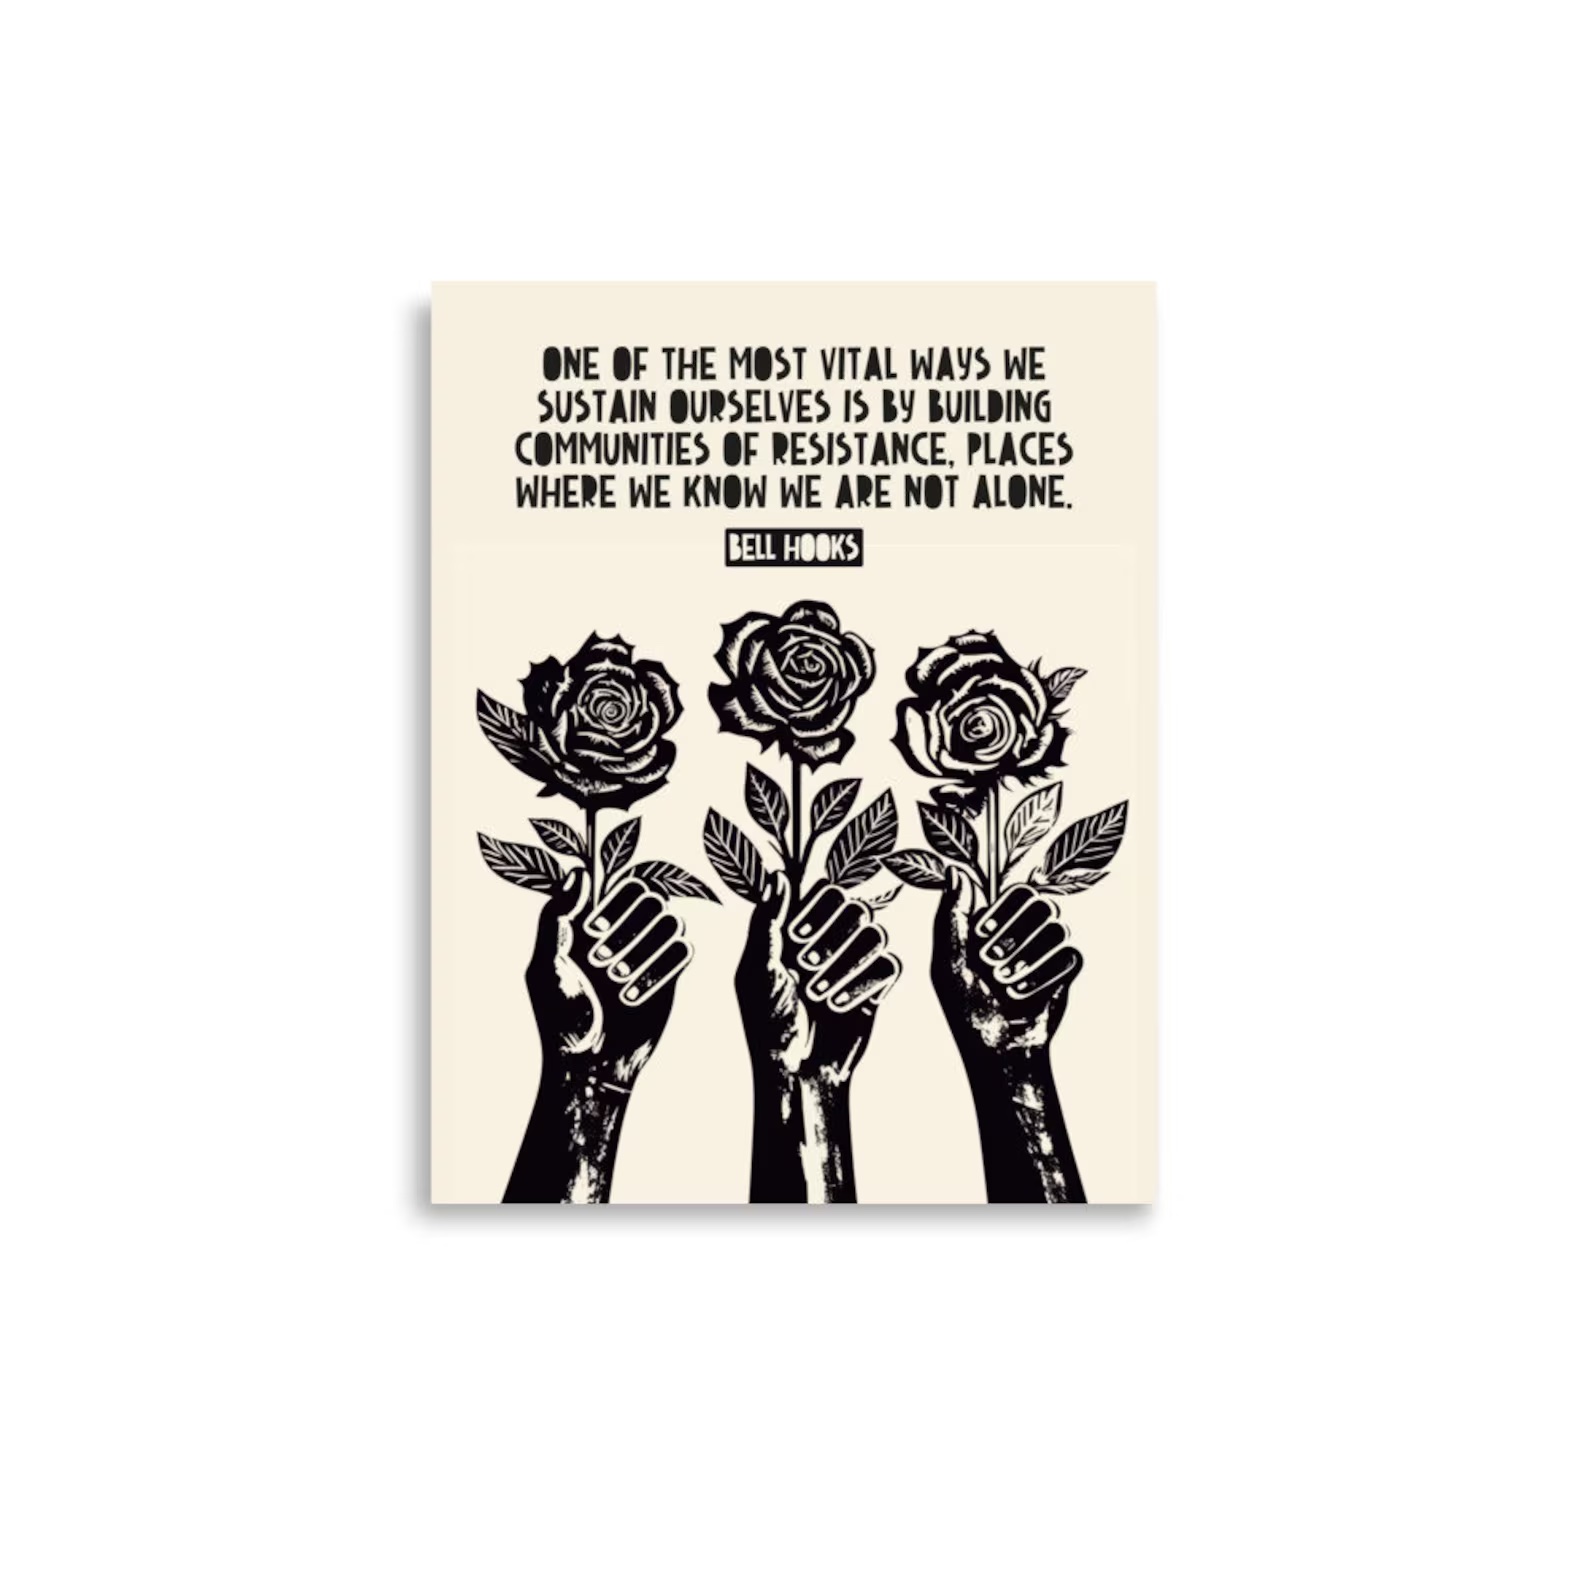 a photo of a graphic featuring a quote from bell hooks that says, "One of the most vital ways we sustain ourselves is by sustaining communities of resistance. Places we know we are not alone."